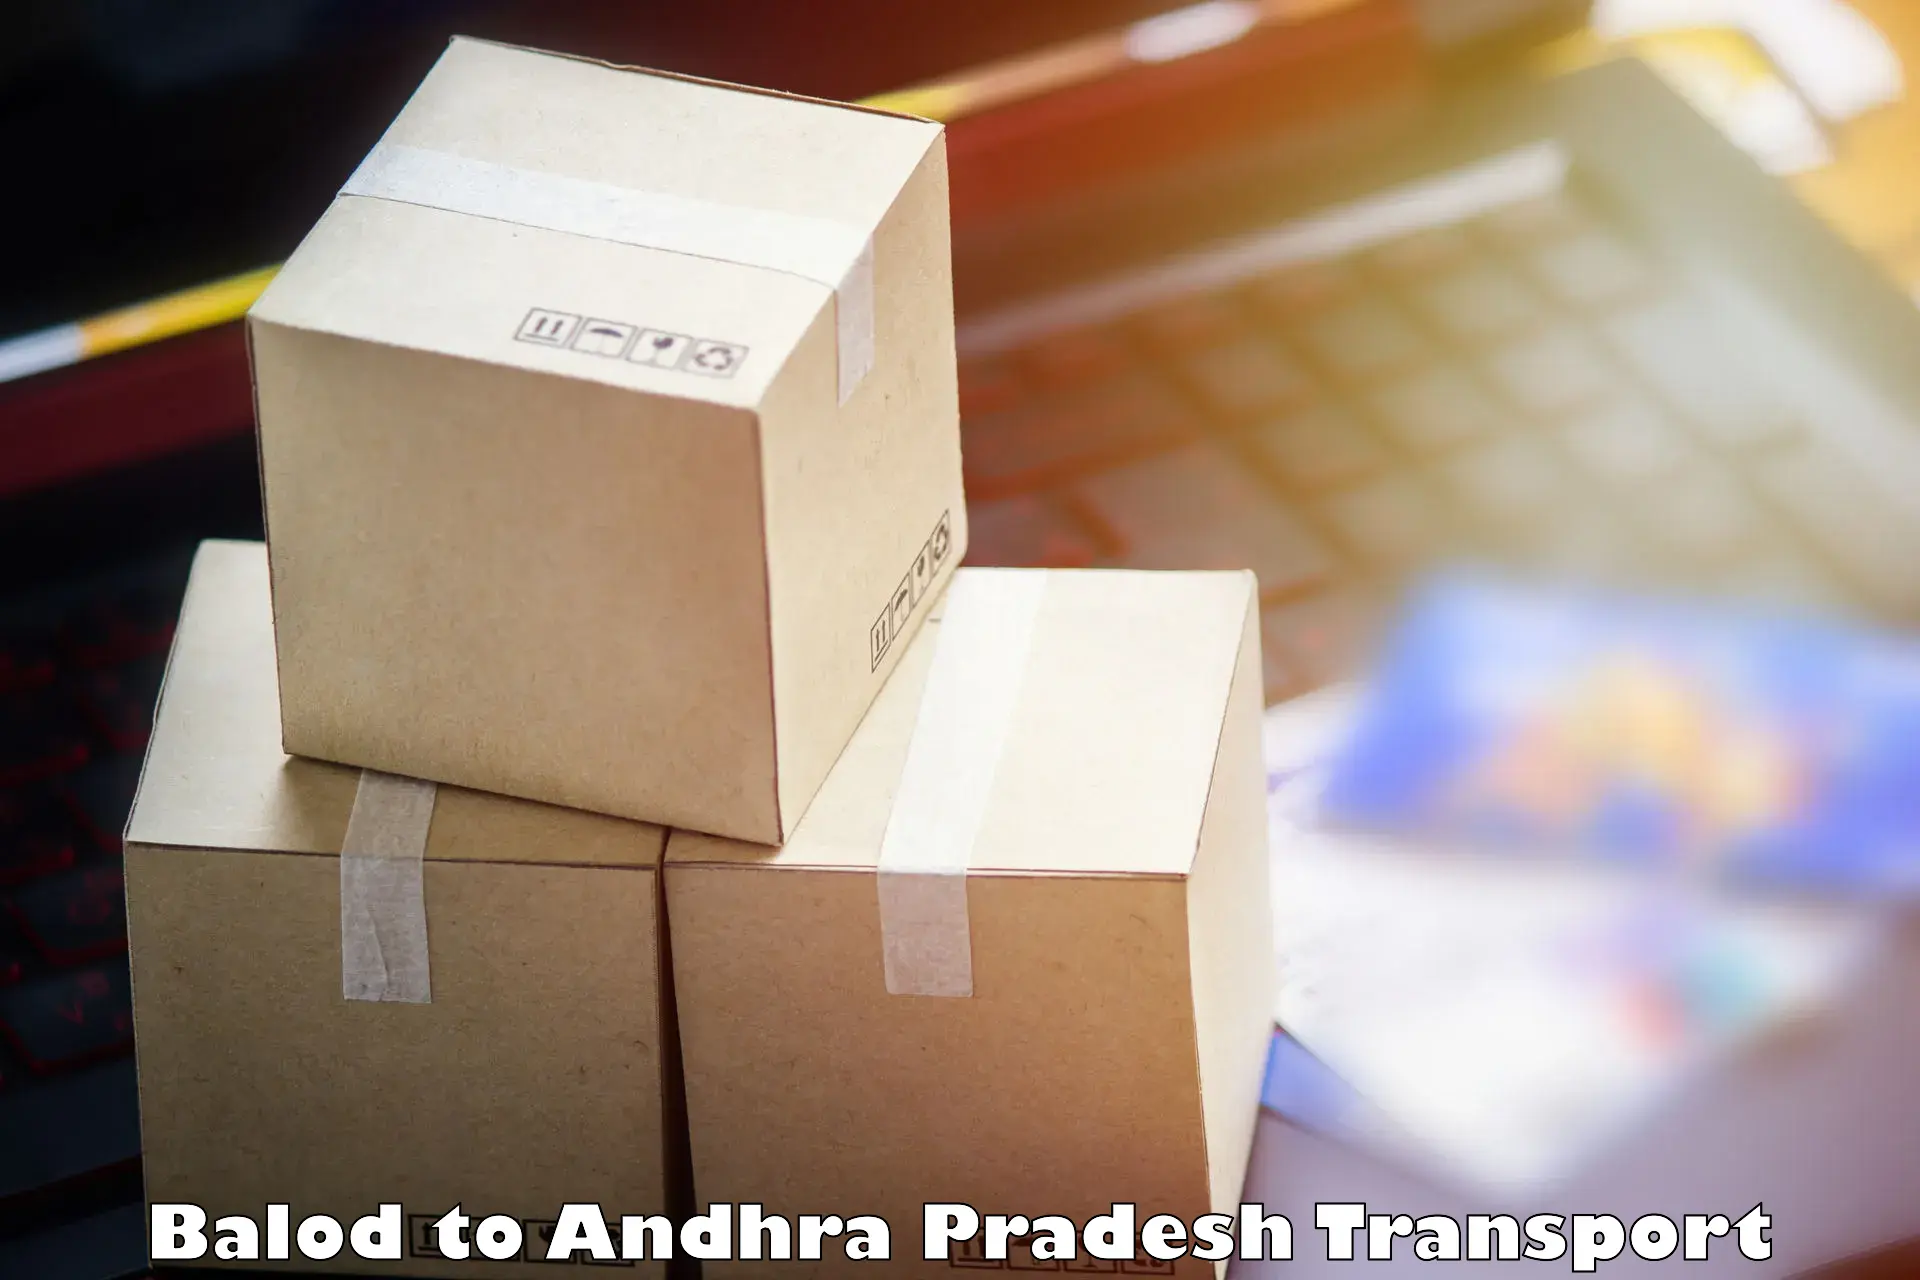 Goods delivery service Balod to Gopalapatnam